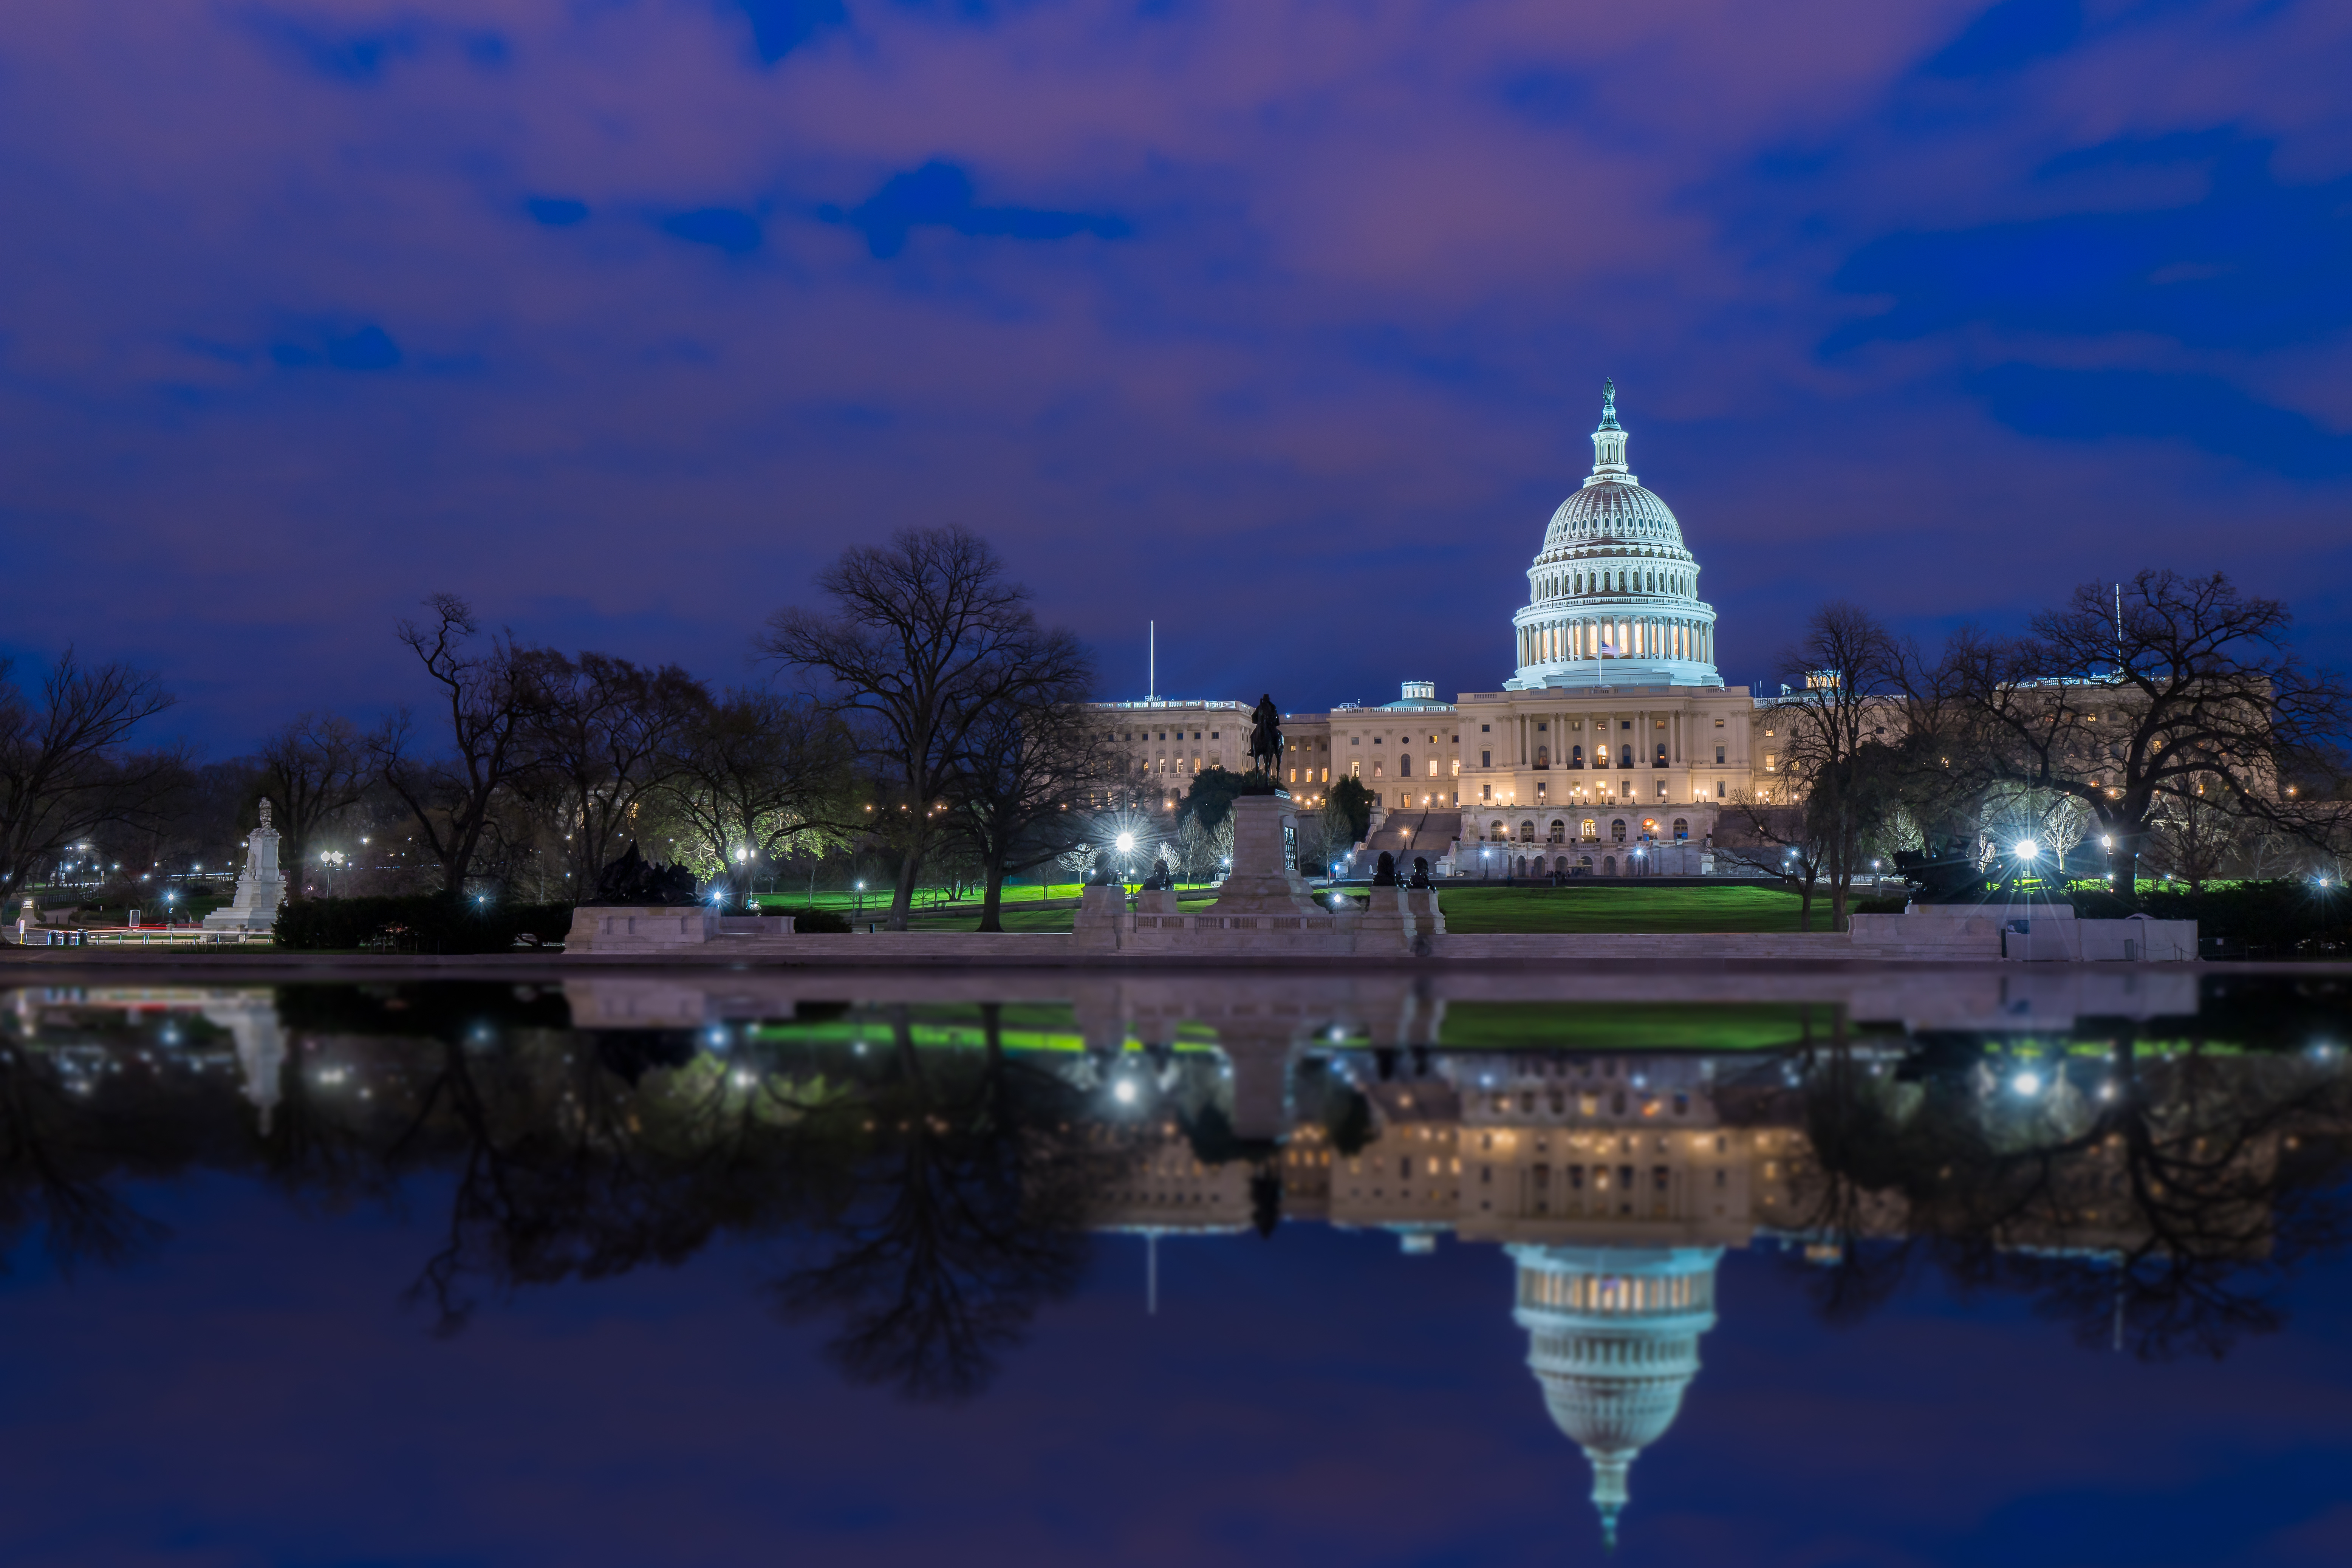 The United States Capitol with reflection at night, Washington D